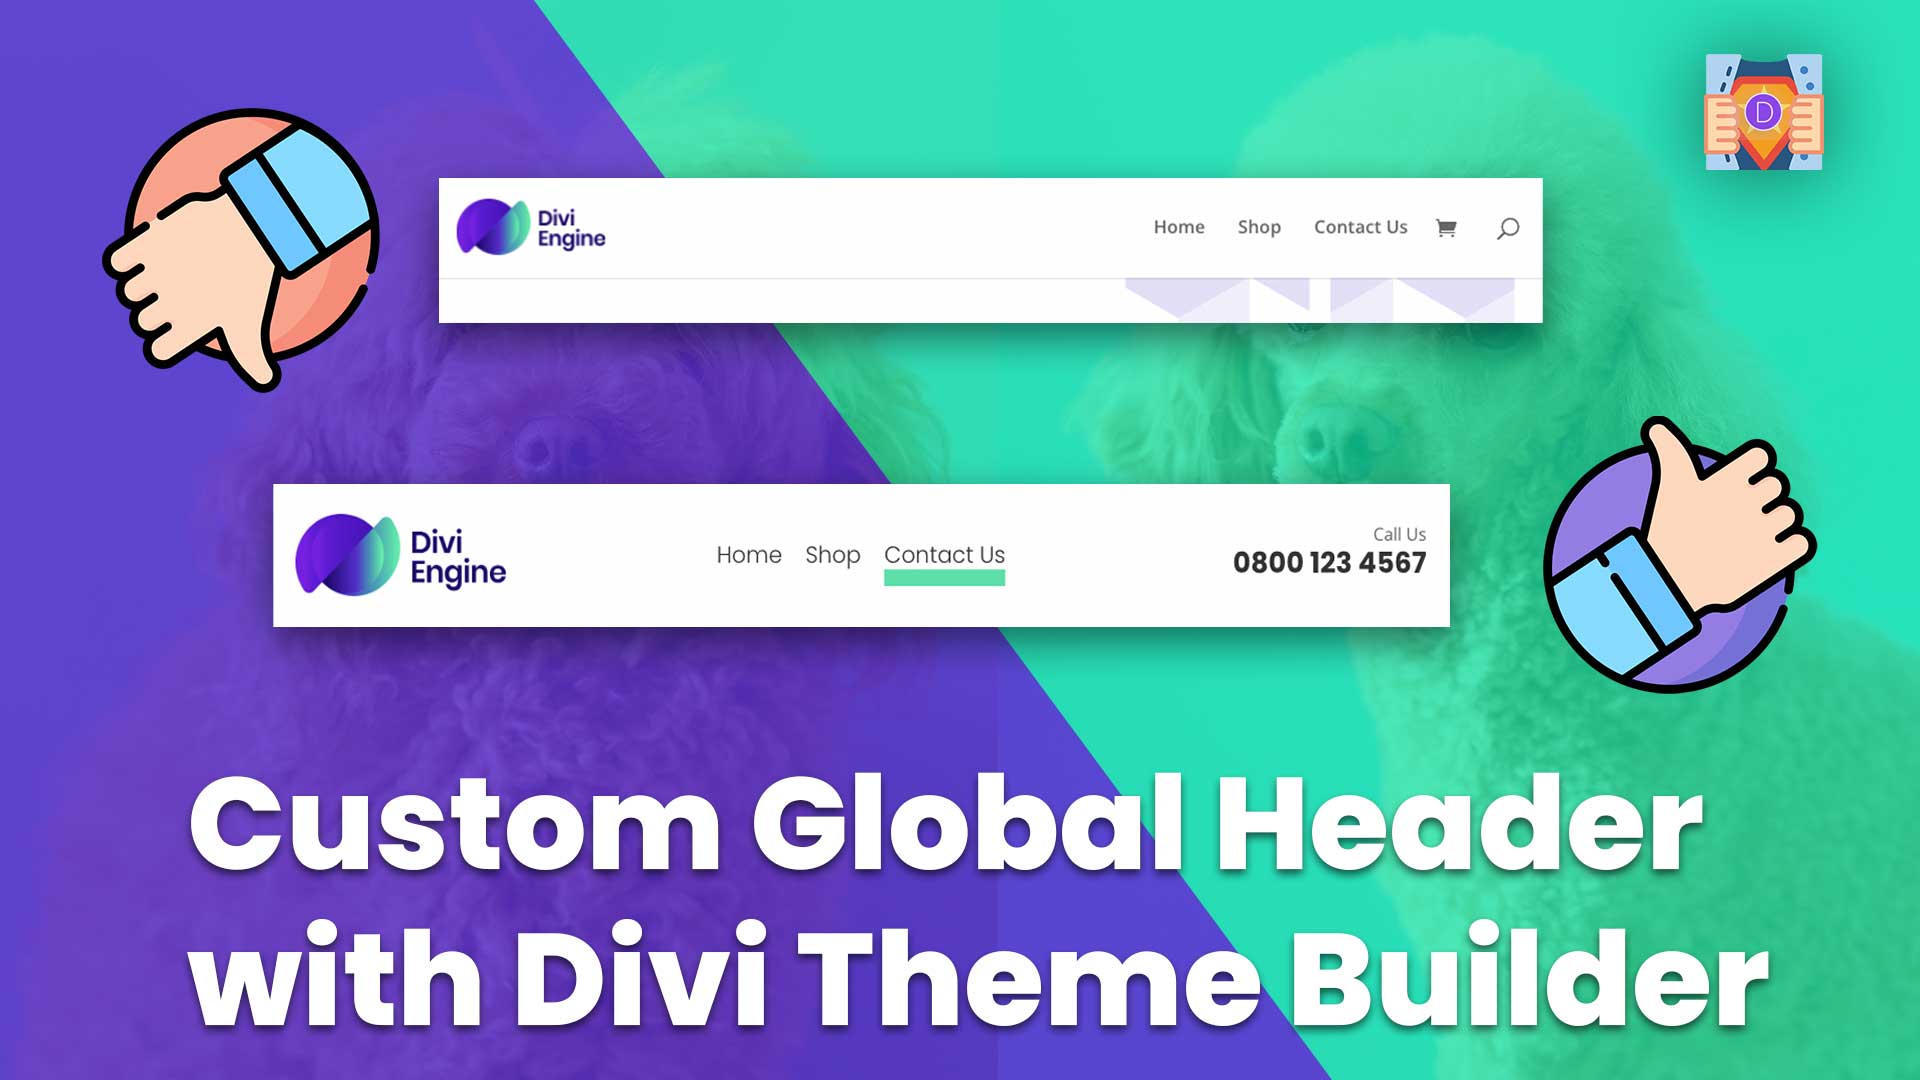 How to Build a Divi Global Header using the Divi Theme Builder